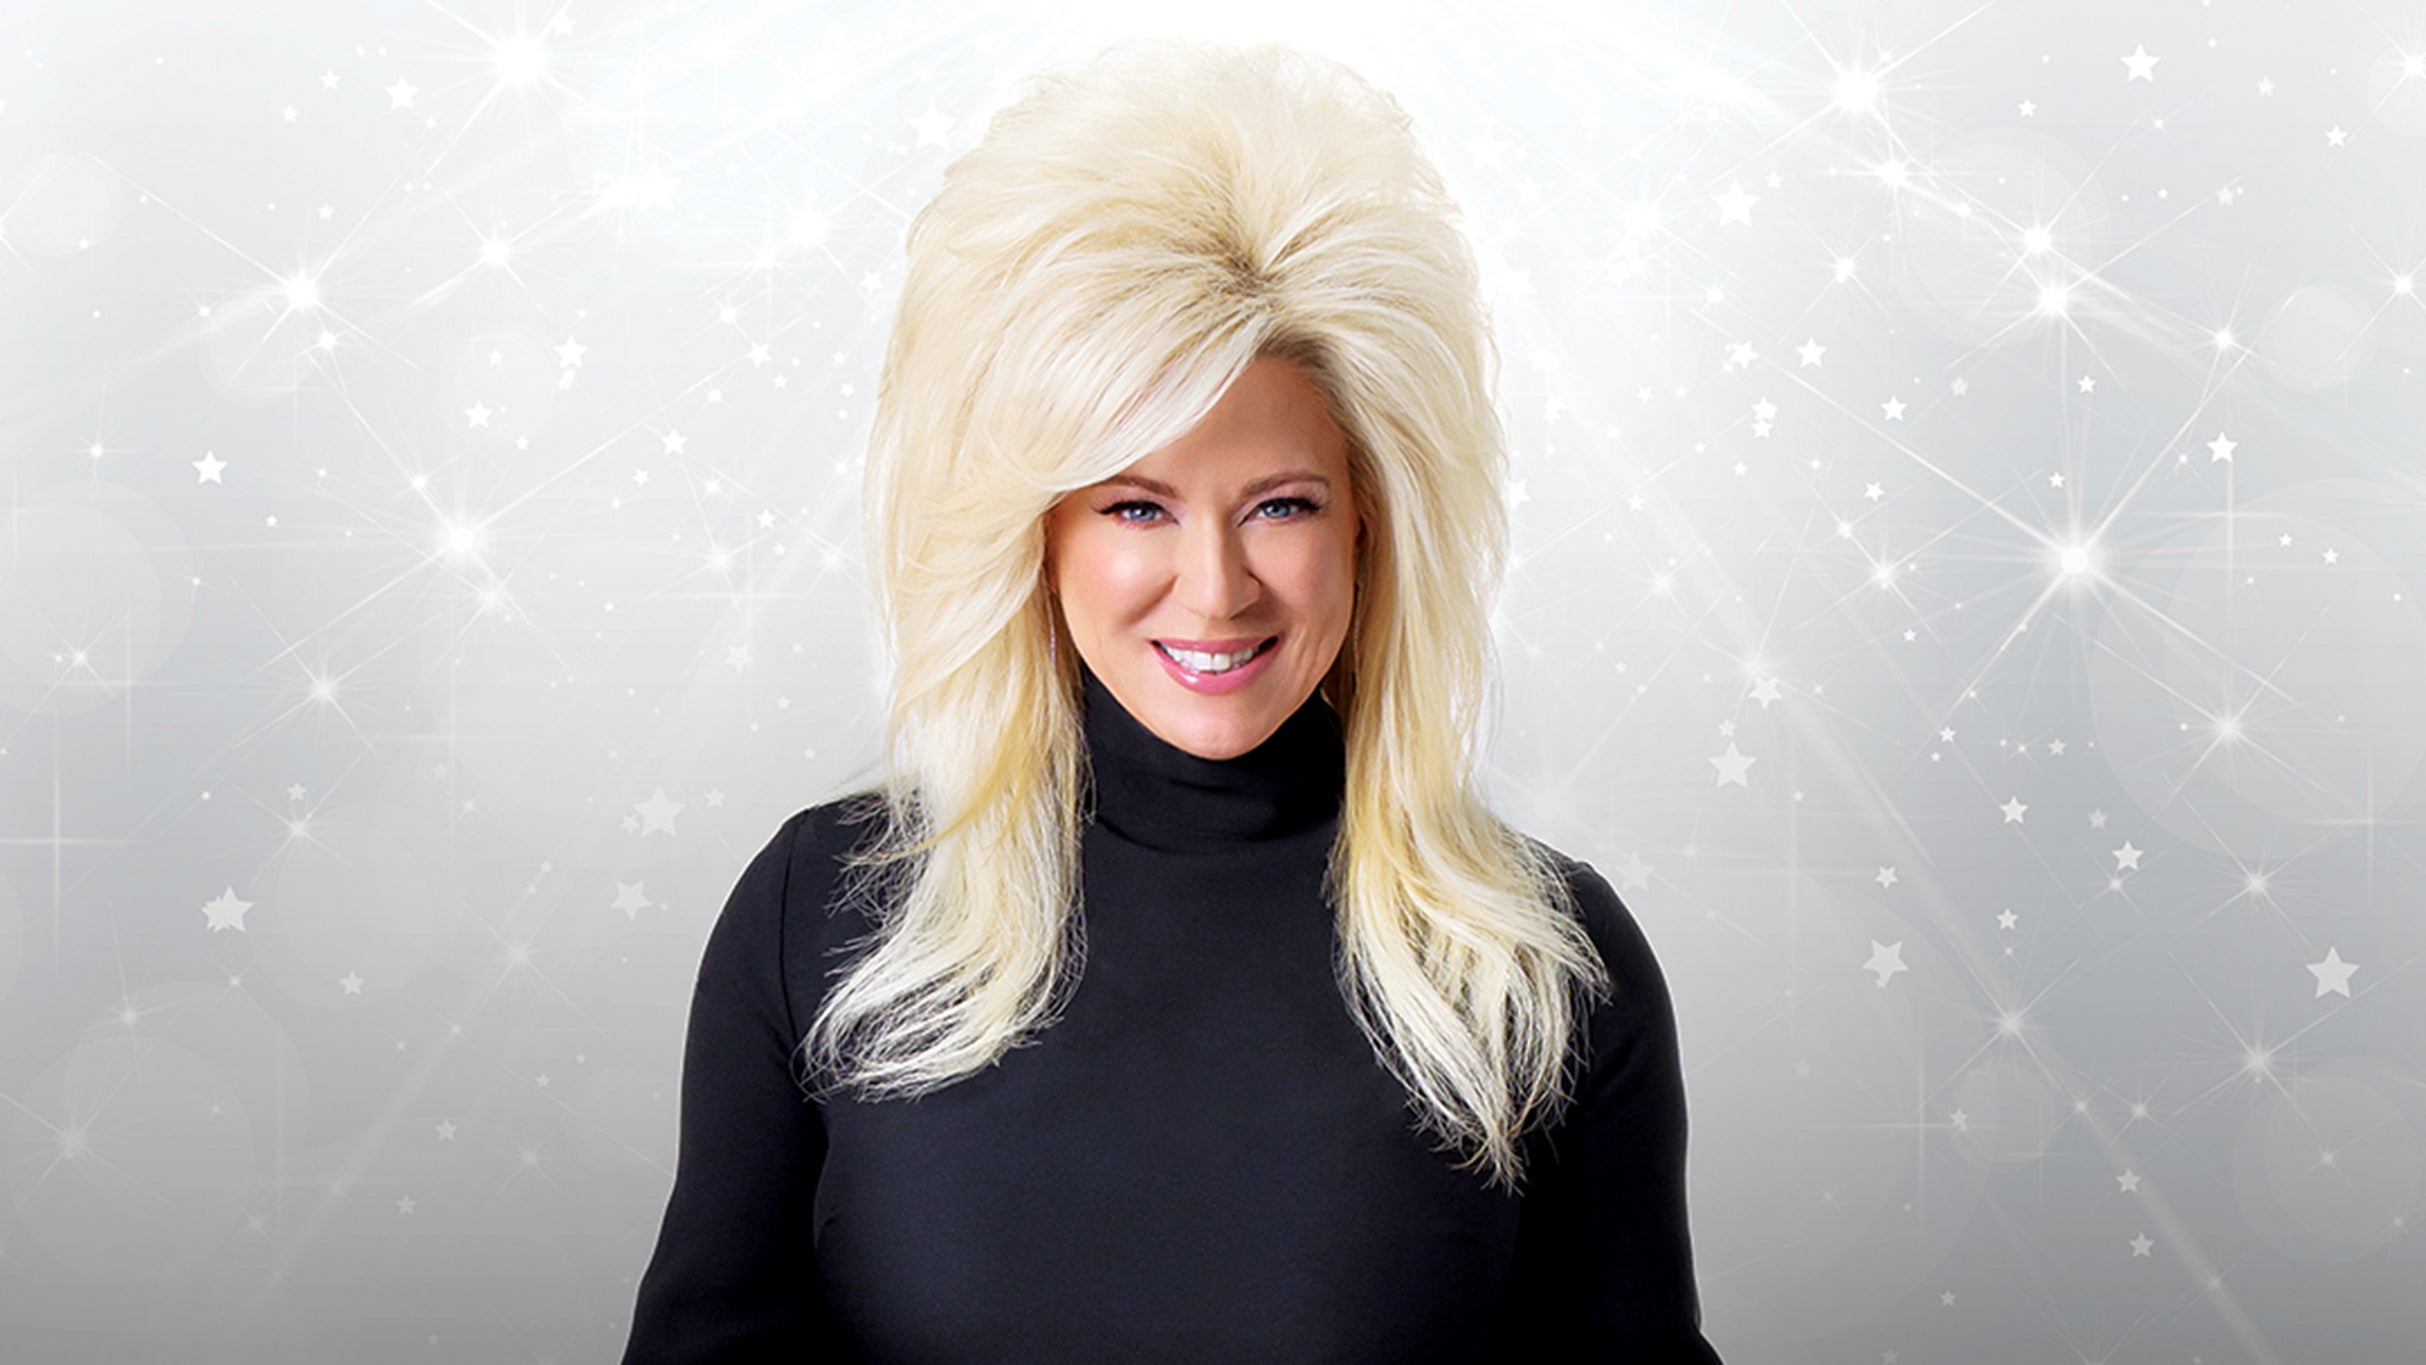 Theresa Caputo Live! The Experience in Bethlehem promo photo for Ticketmaster presale offer code